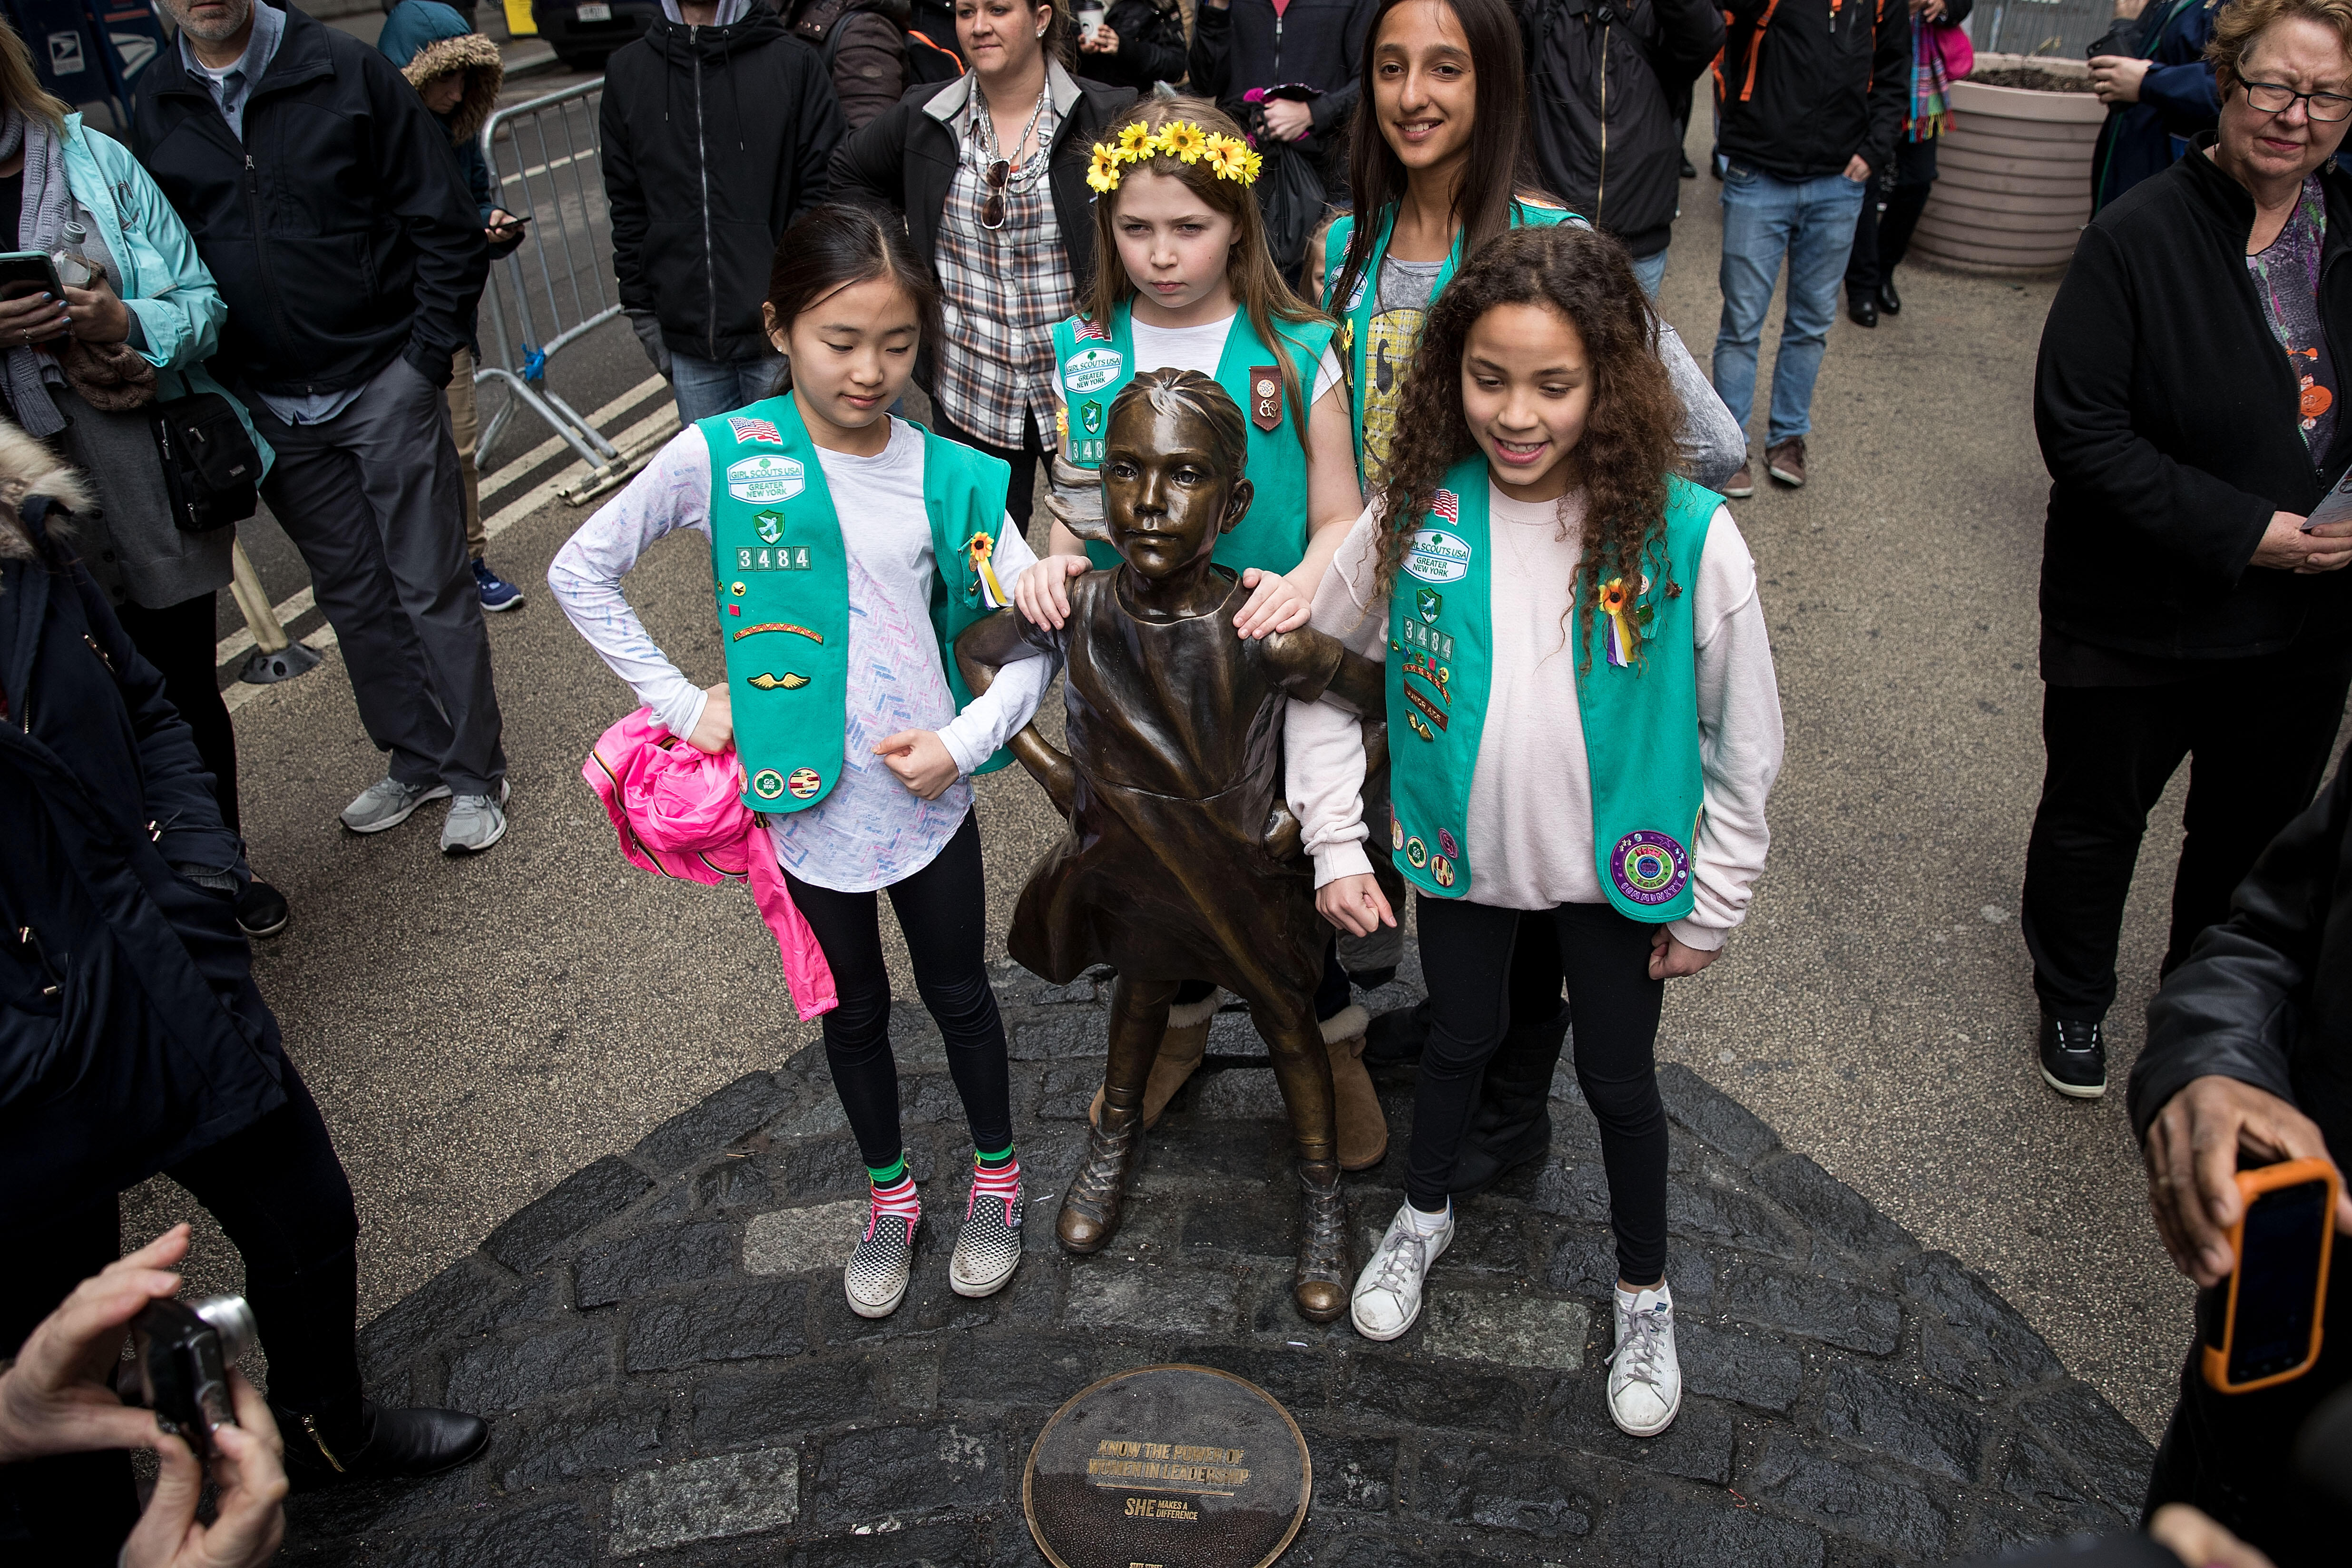 NEW YORK, NY - MARCH 27: Young members of Girl Scout troop 3484 pose for photos with the 'Fearless Girl' statue, March 27, 2017 in New York City. New York City Mayor Bill De Blasio announced that the popular statue of a young girl staring down the famous 